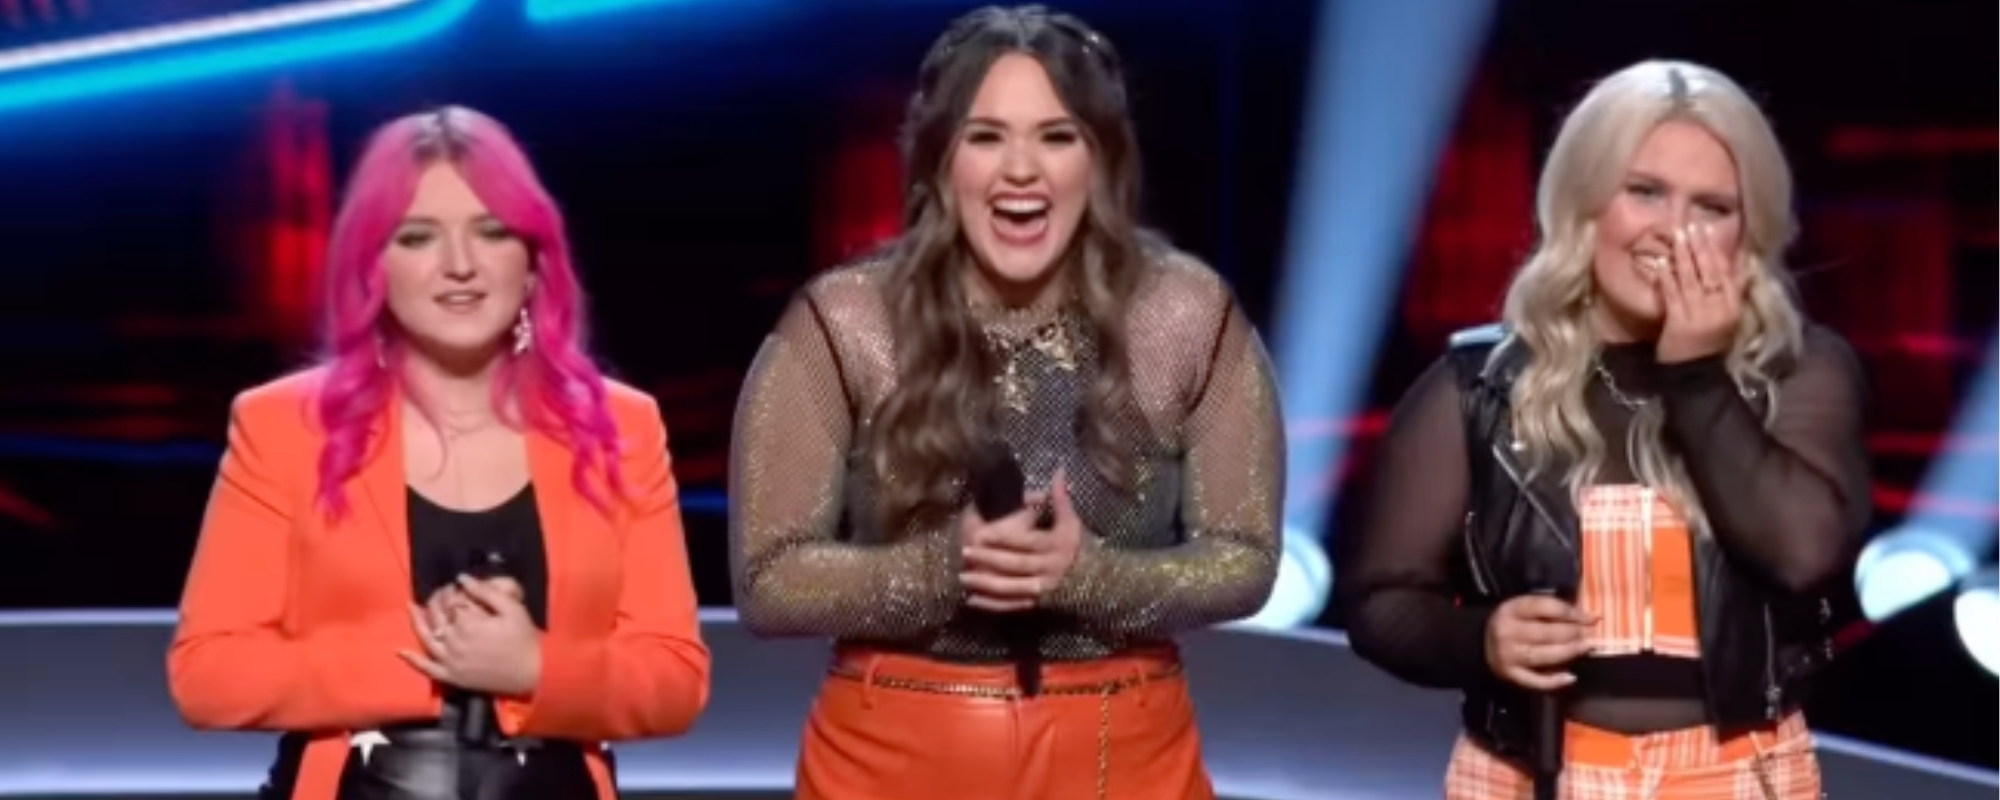 'The Voice' OK3 Finally Reveals Which Coach They Will Team With After 4